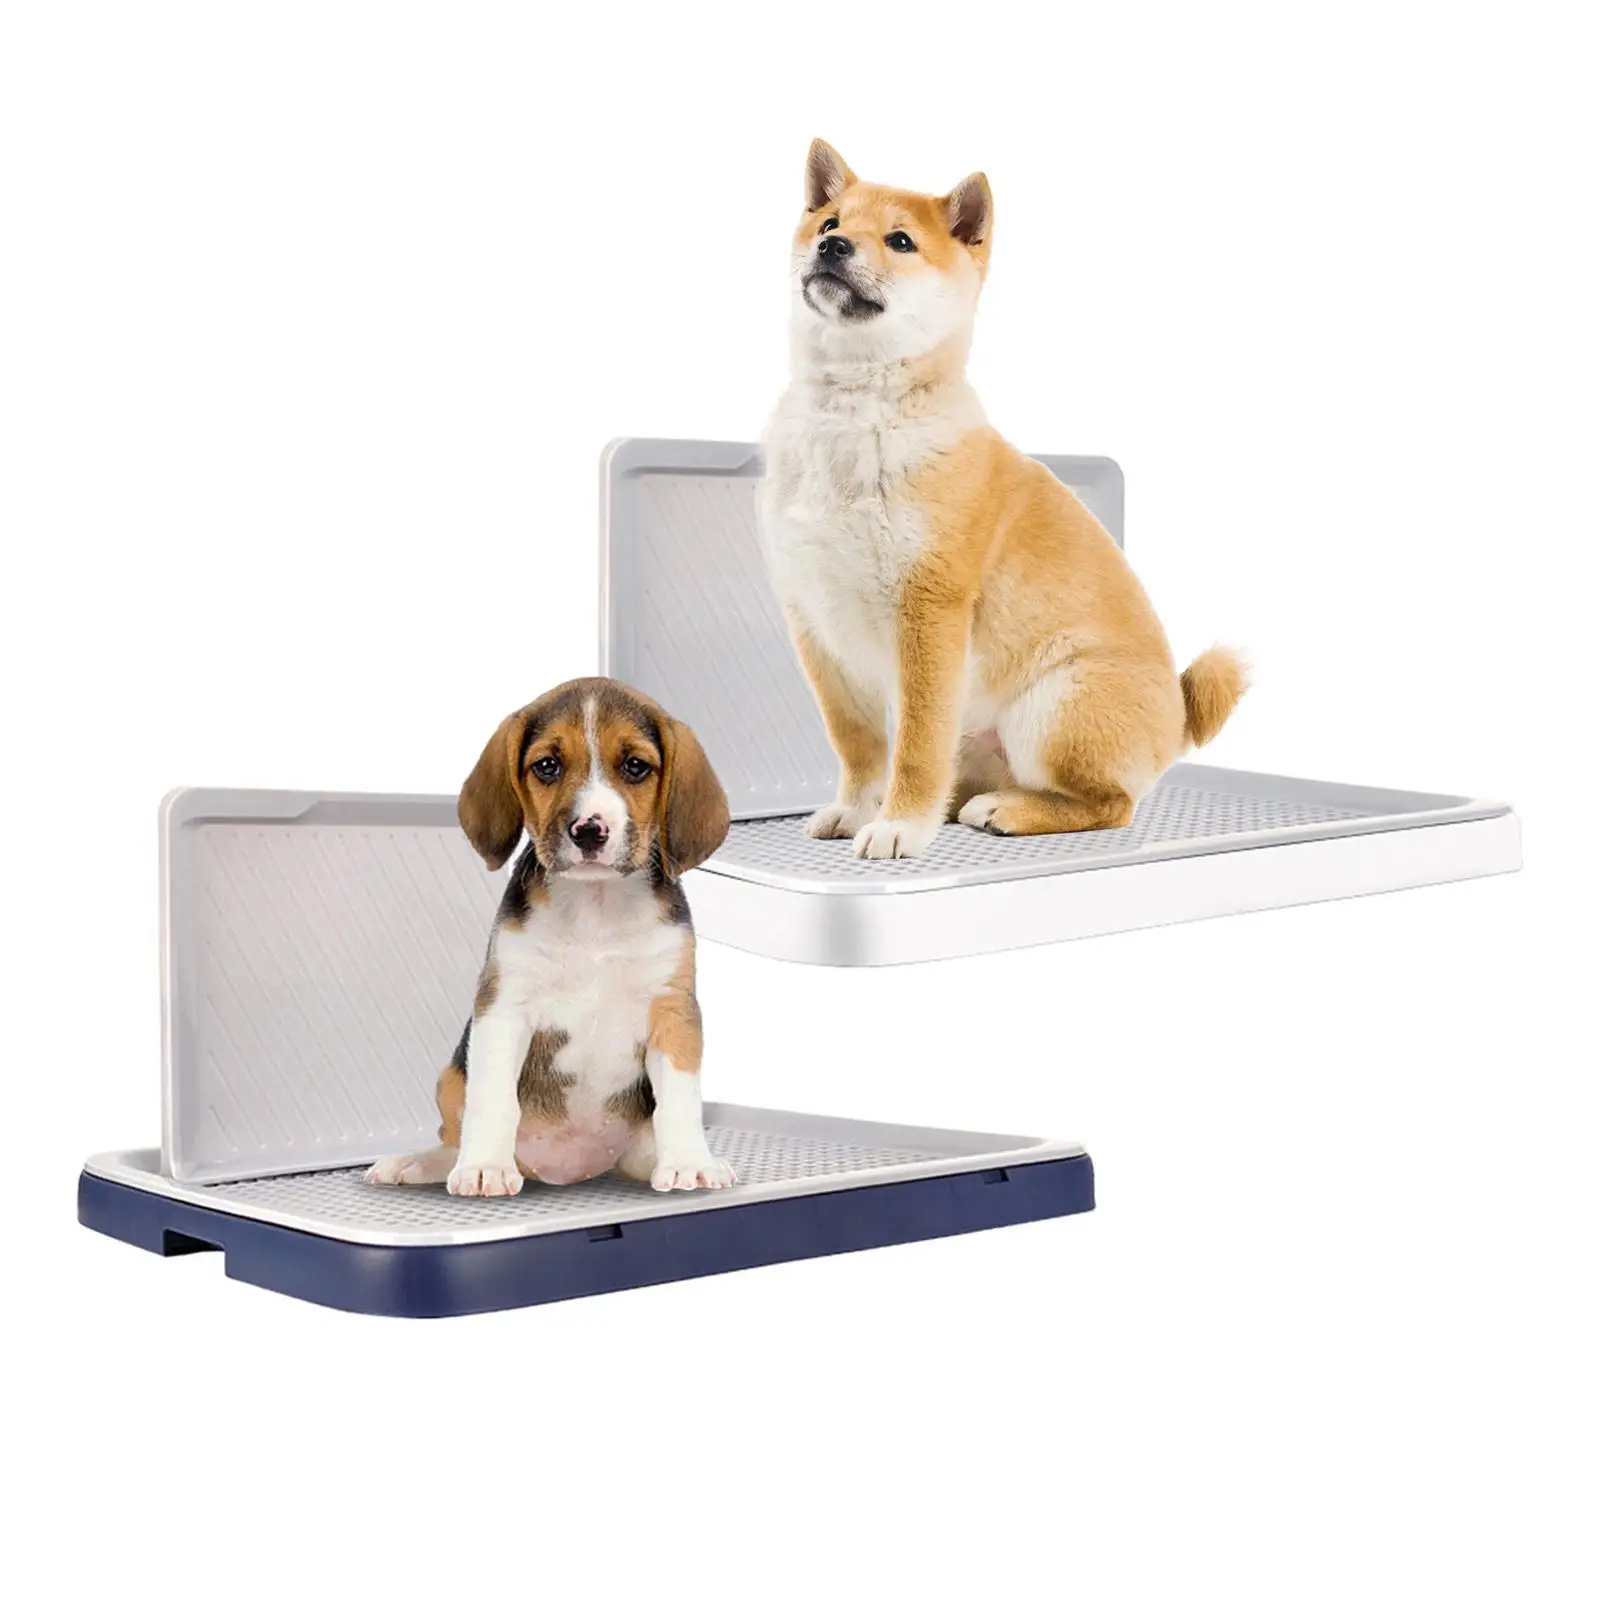 Portable Pet Dog Toilet Puppy Potty Tray Cleaning Tool Removable Litter Tray Training Pad Holder Potty Trainer Corner for Porch